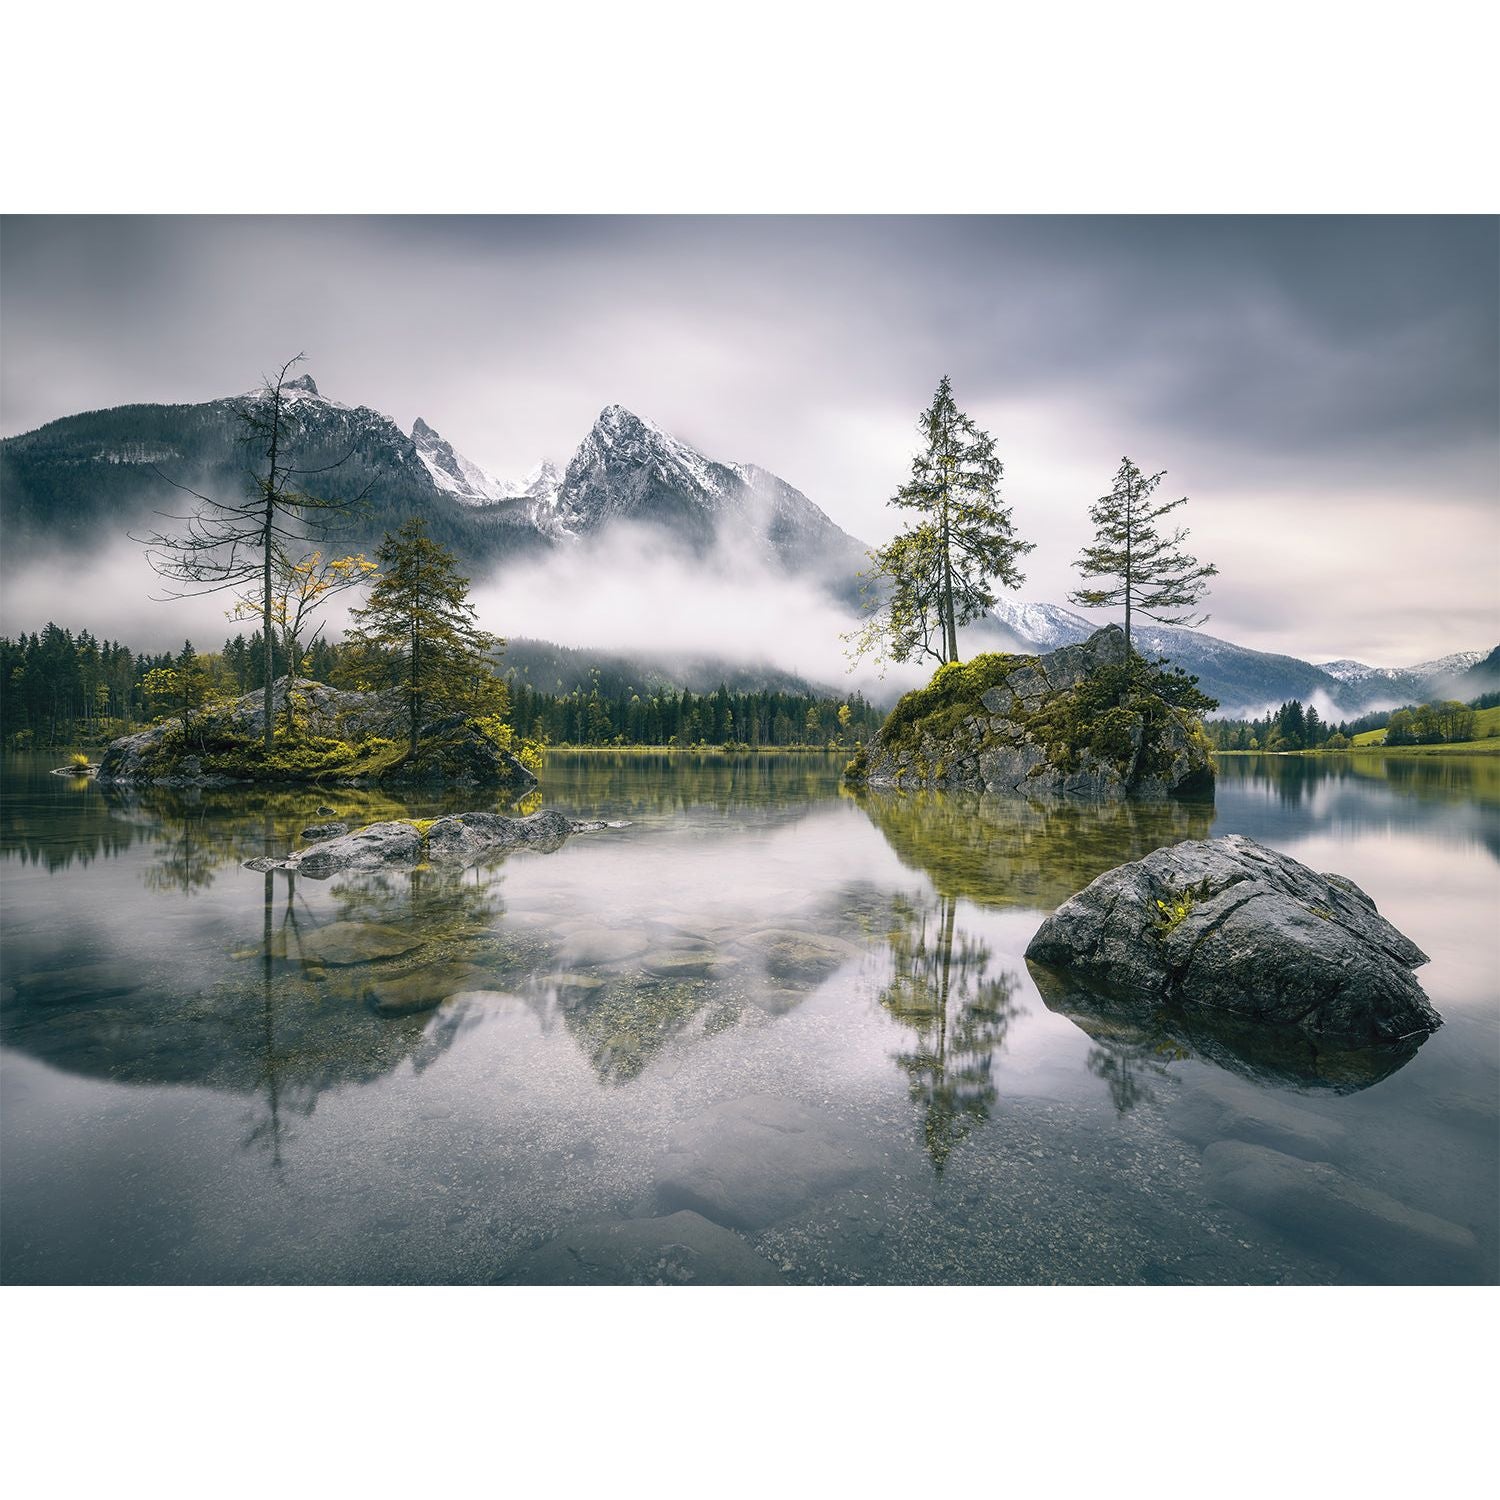 Enchanting Mist: Water, Fog, Trees, and Mountains Wall Mural